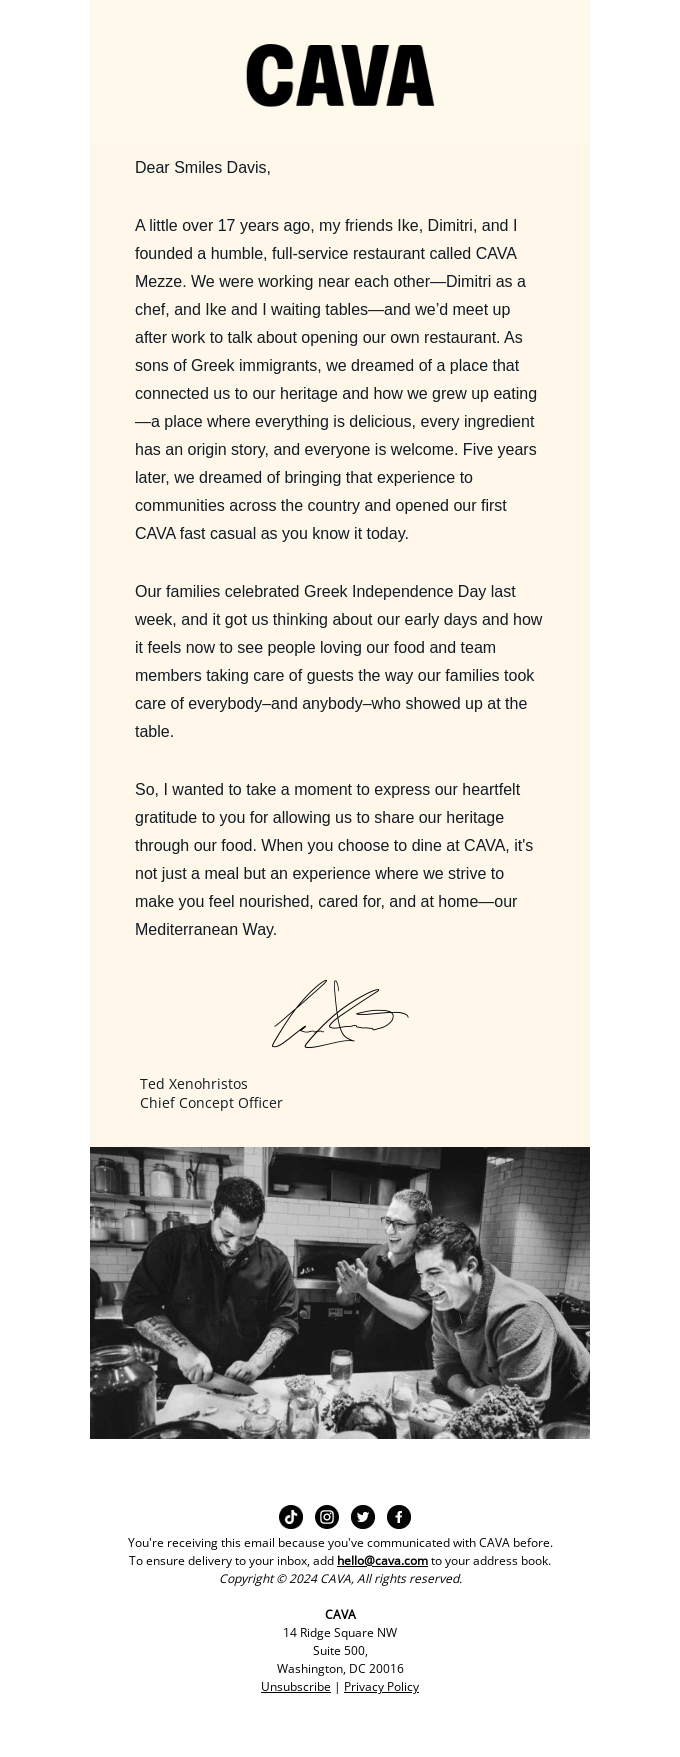 A message from CAVA Co-Founder Ted Xenohristos